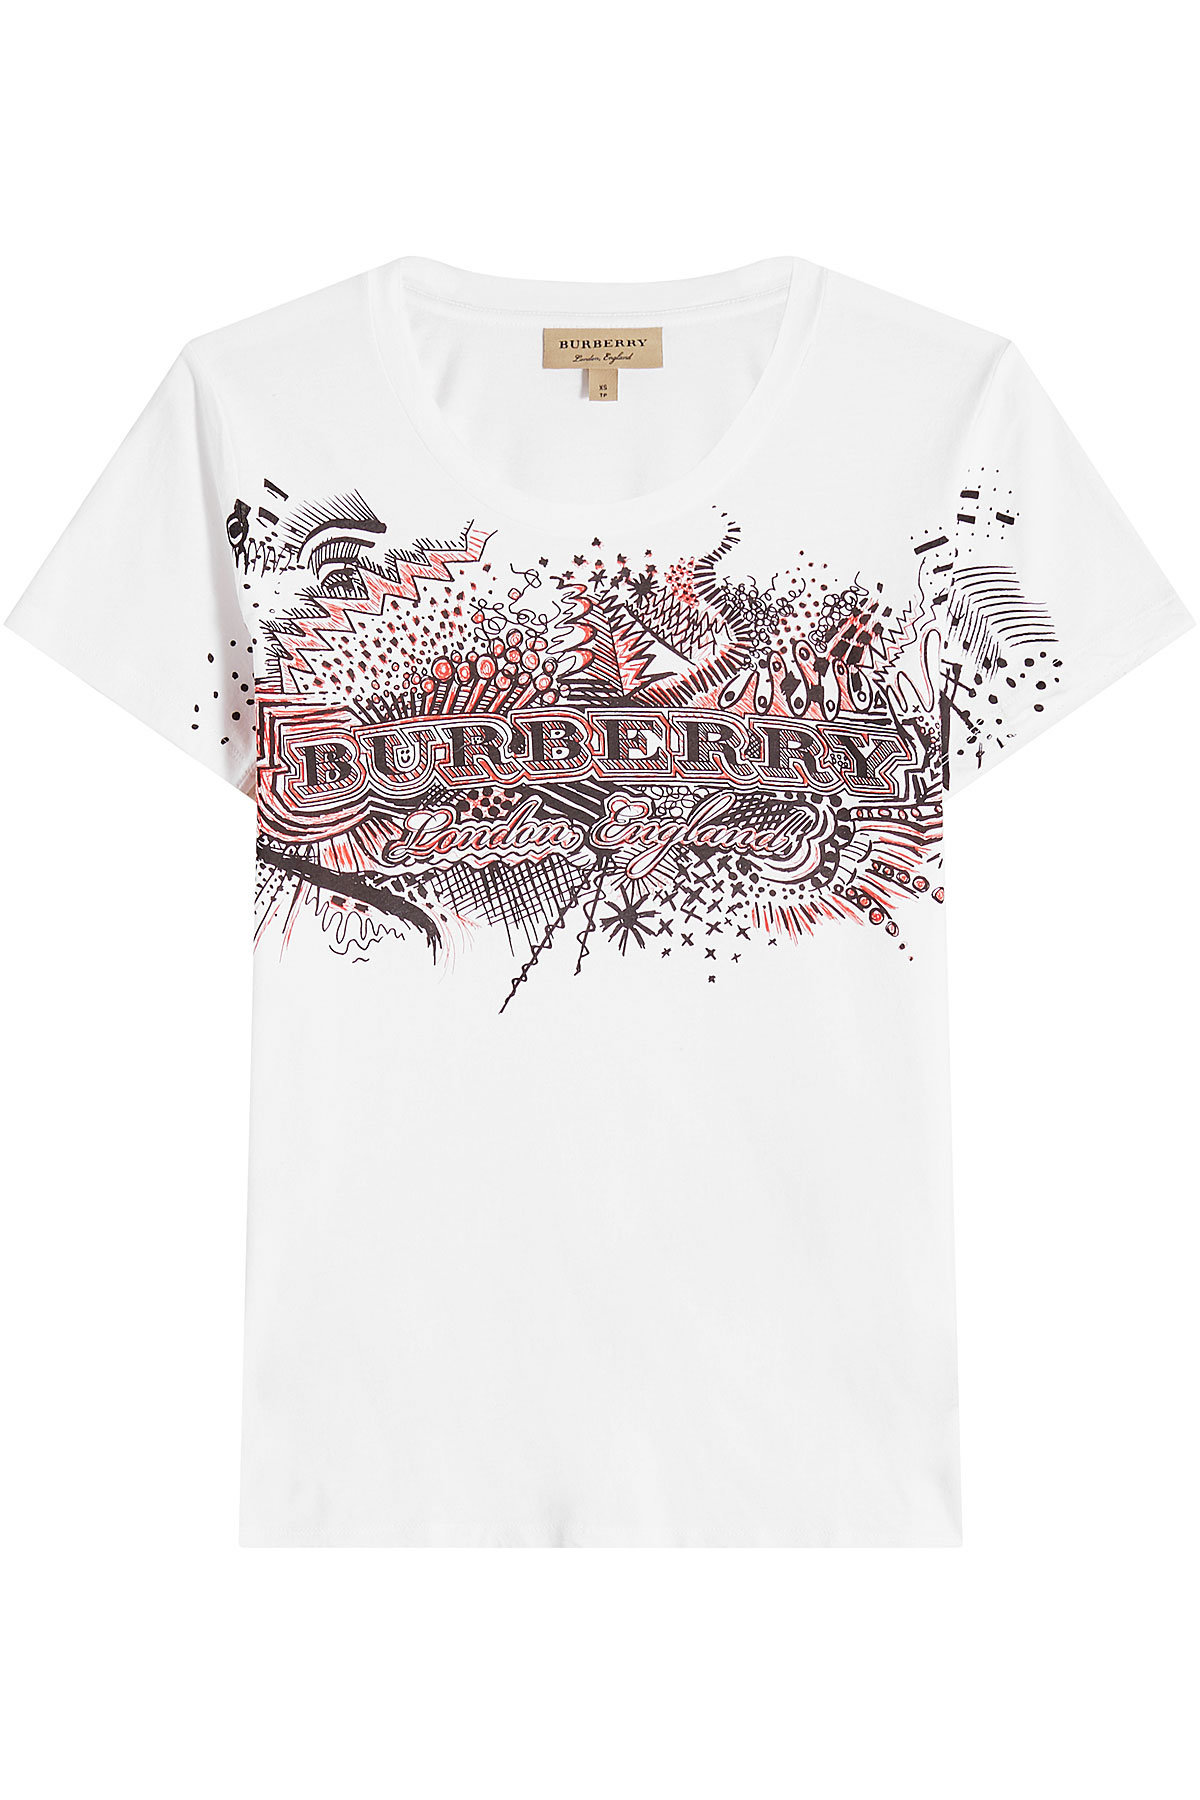 Burberry - Darnley Doodle Printed Cotton T-Shirt